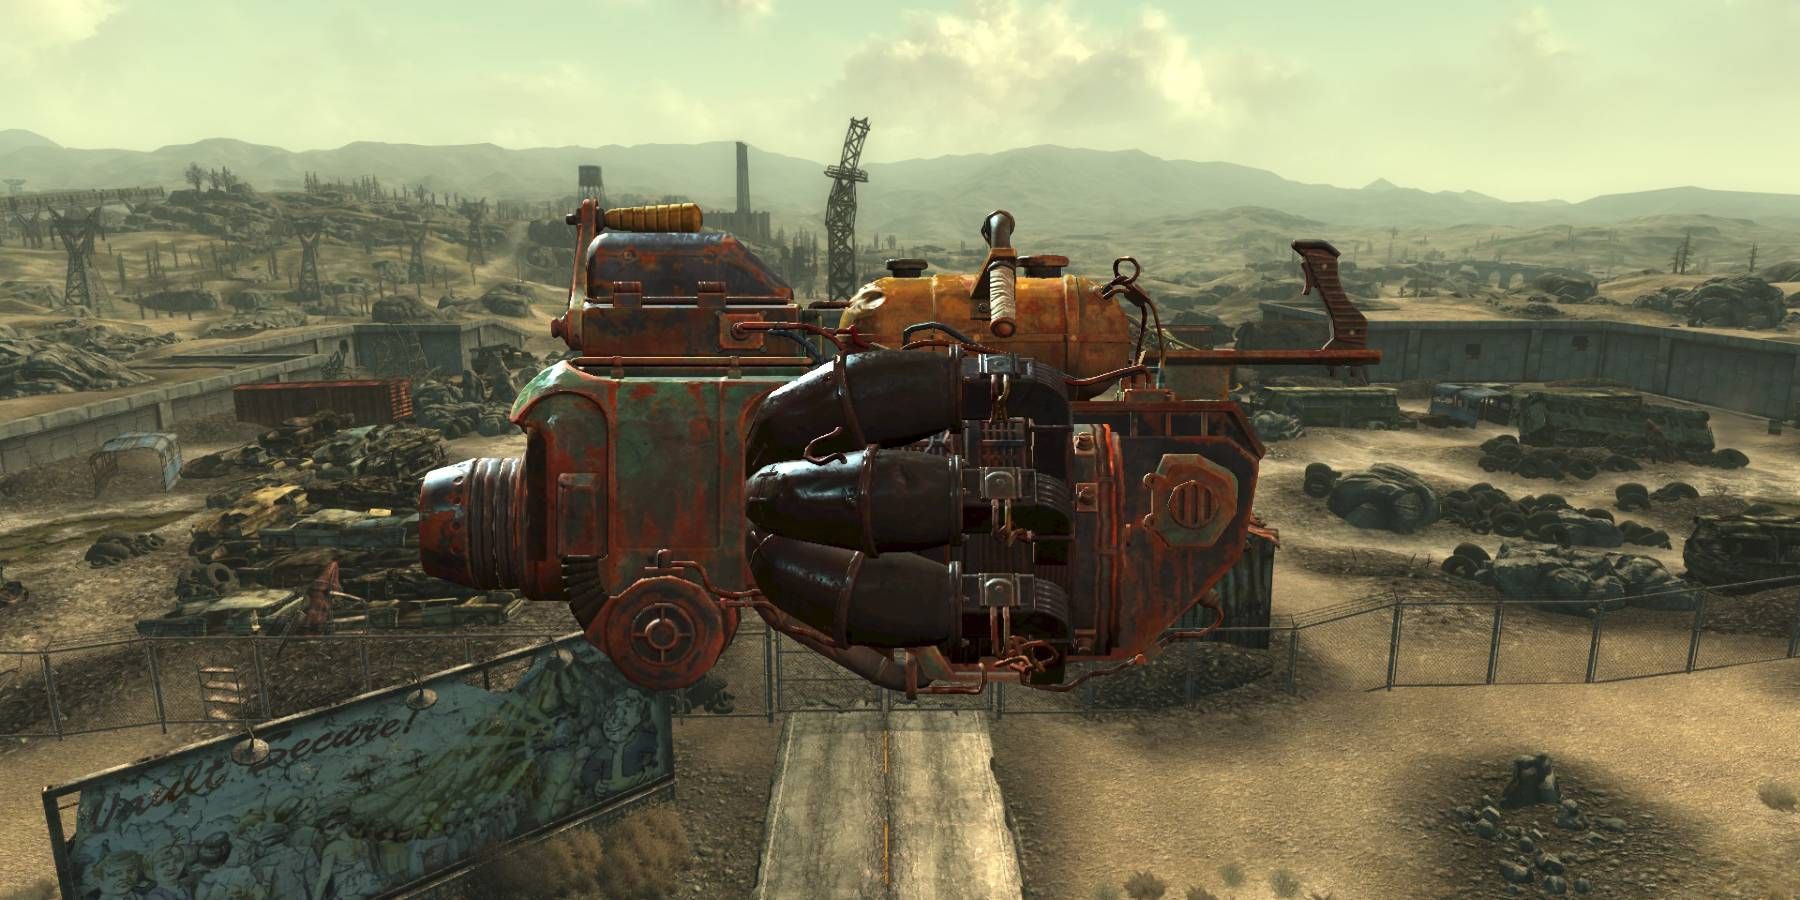 The Junk Jet from Fallout 4 over the Scrapyard from Fallout 3